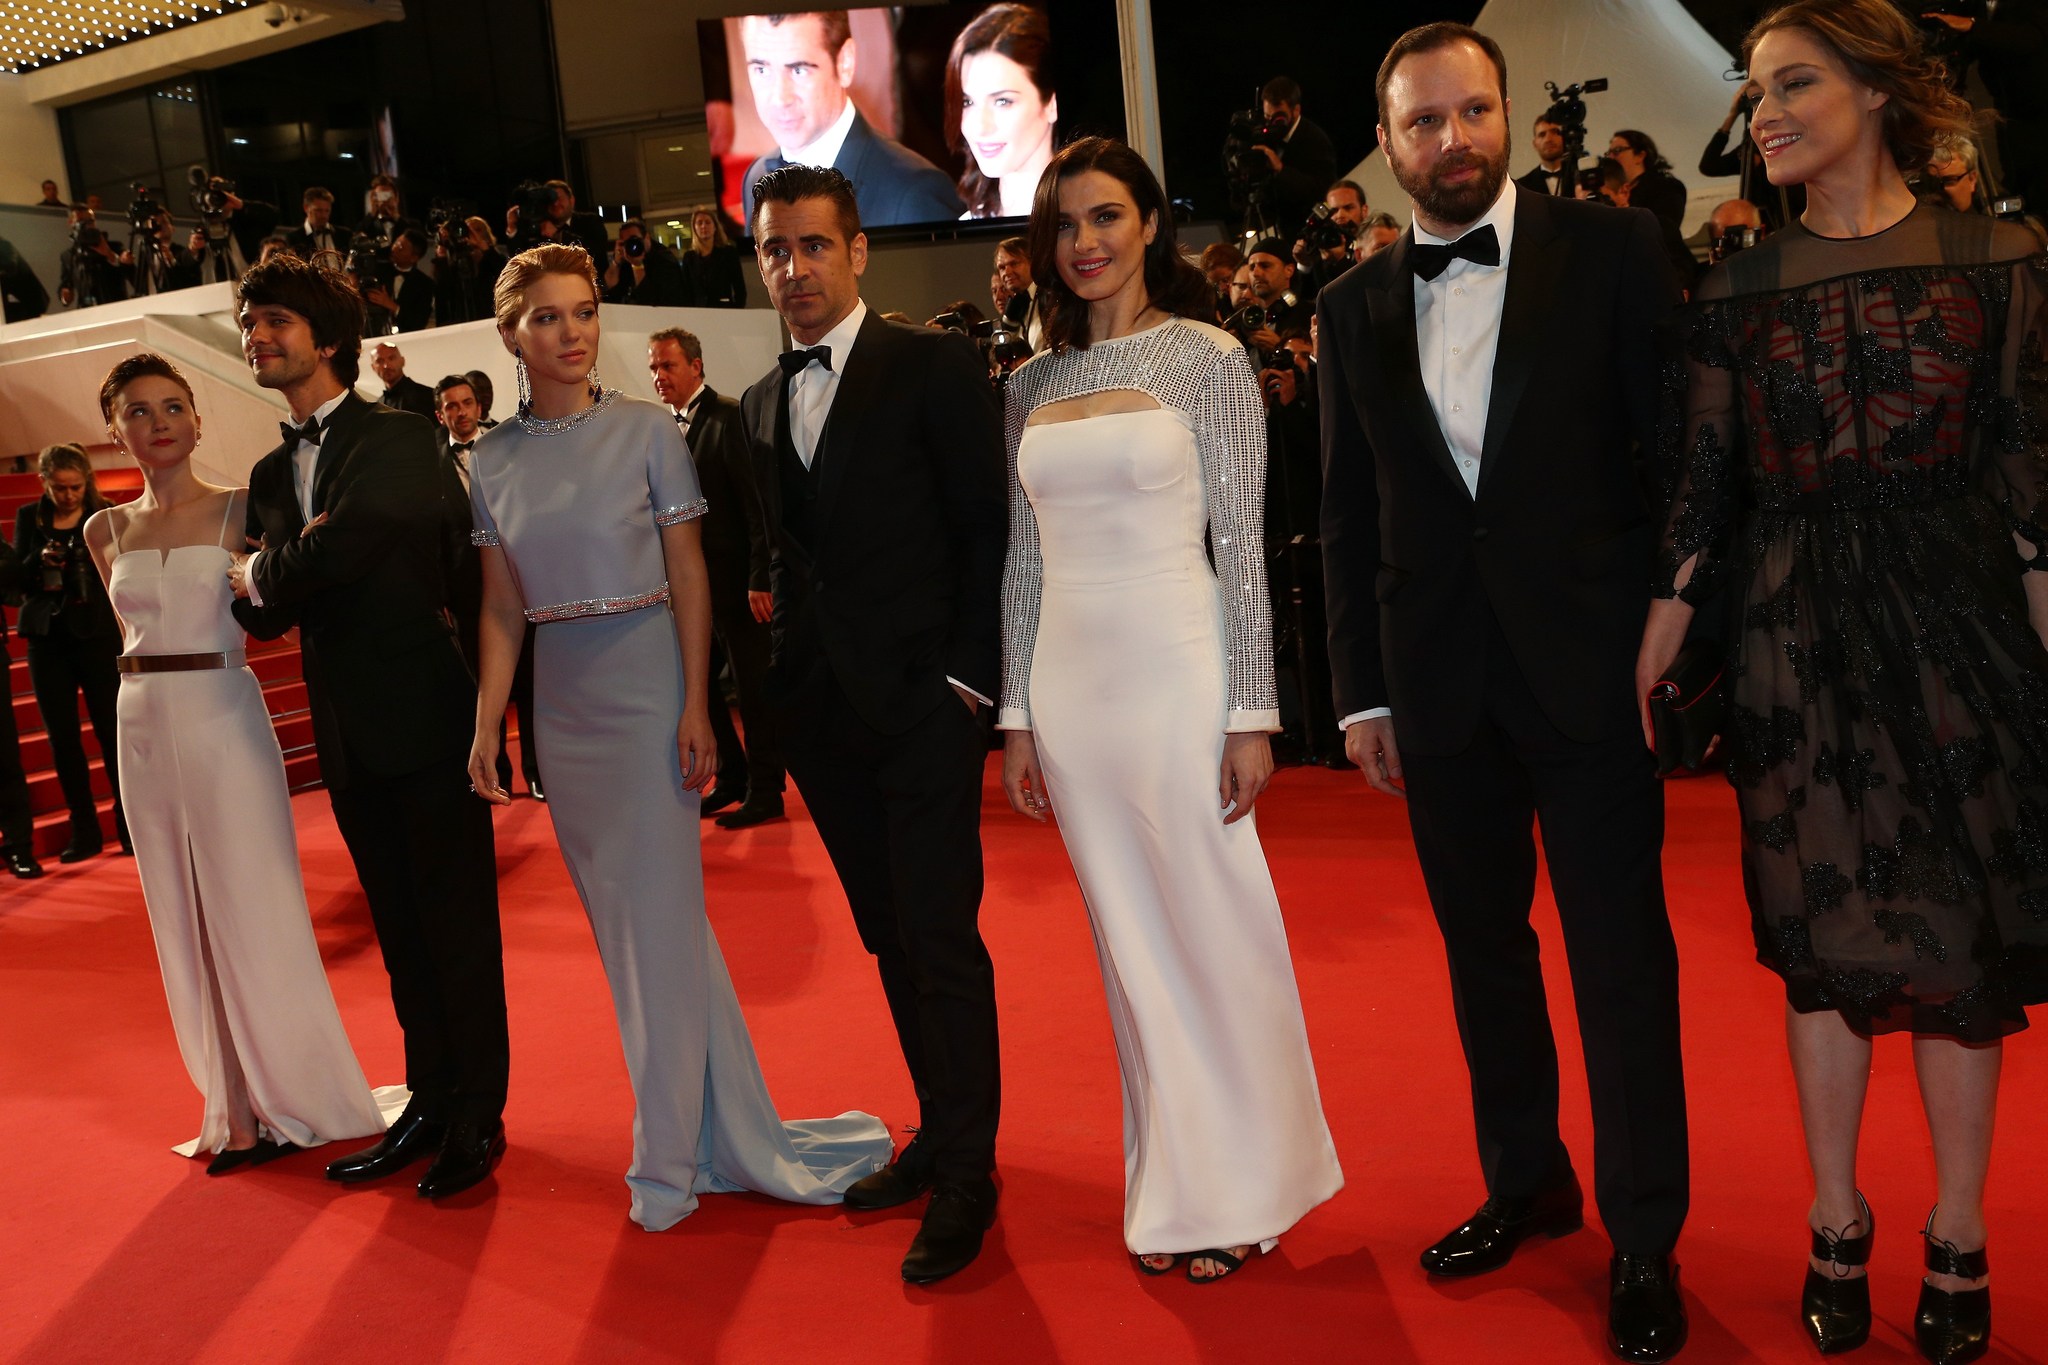 Rachel Weisz, Colin Farrell, Yorgos Lanthimos, Ben Whishaw, Jessica Barden, Léa Seydoux and Ariane Labed at event of The Lobster (2015)